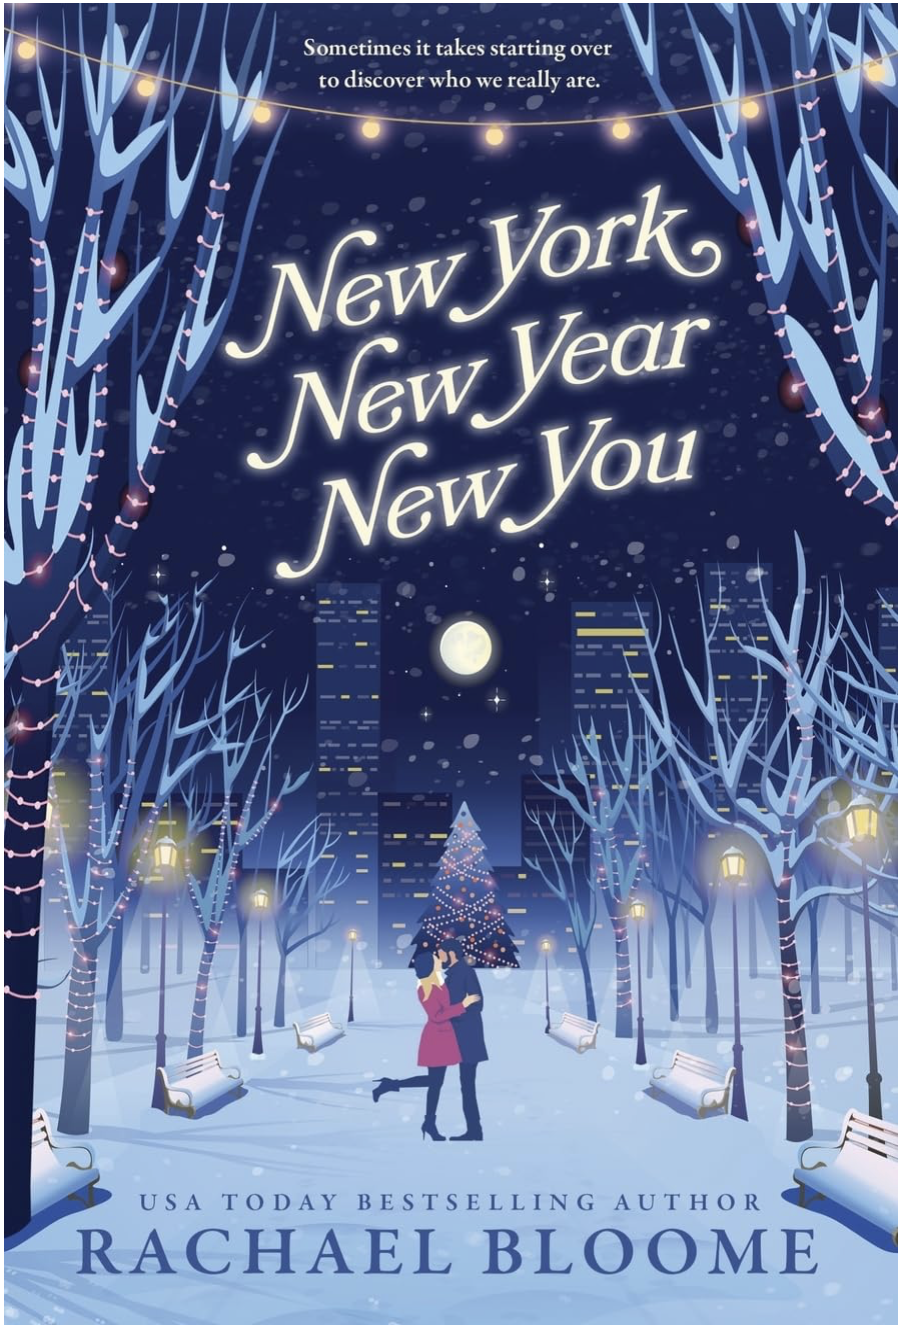 New York New Year New You